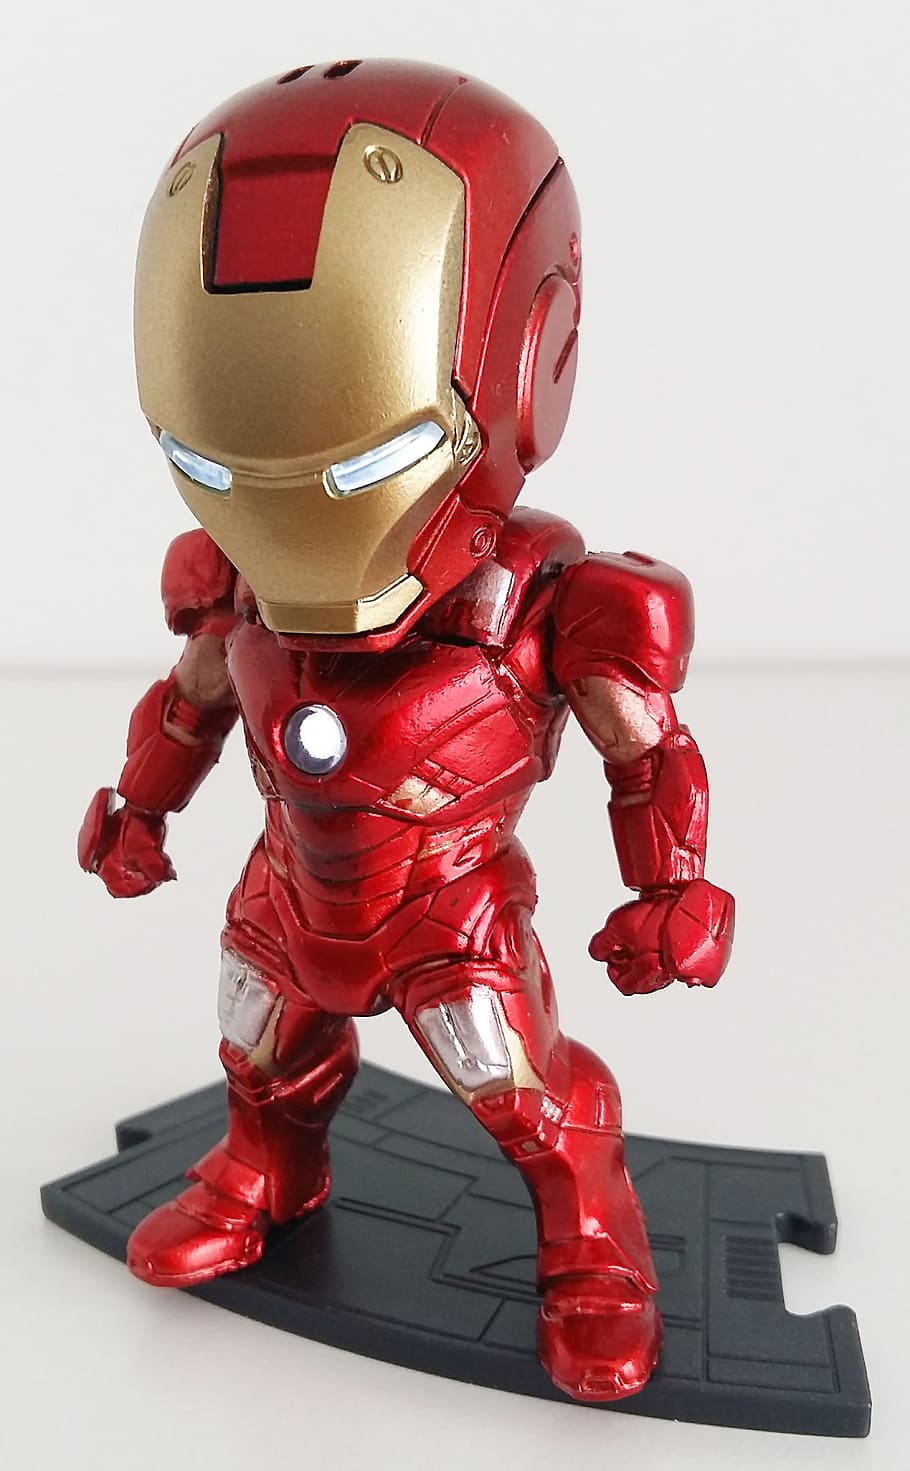 Action Figure, Collect, Figures, Toys, Collectibles, - Iron Man Lelun Kuvia - HD Wallpaper 